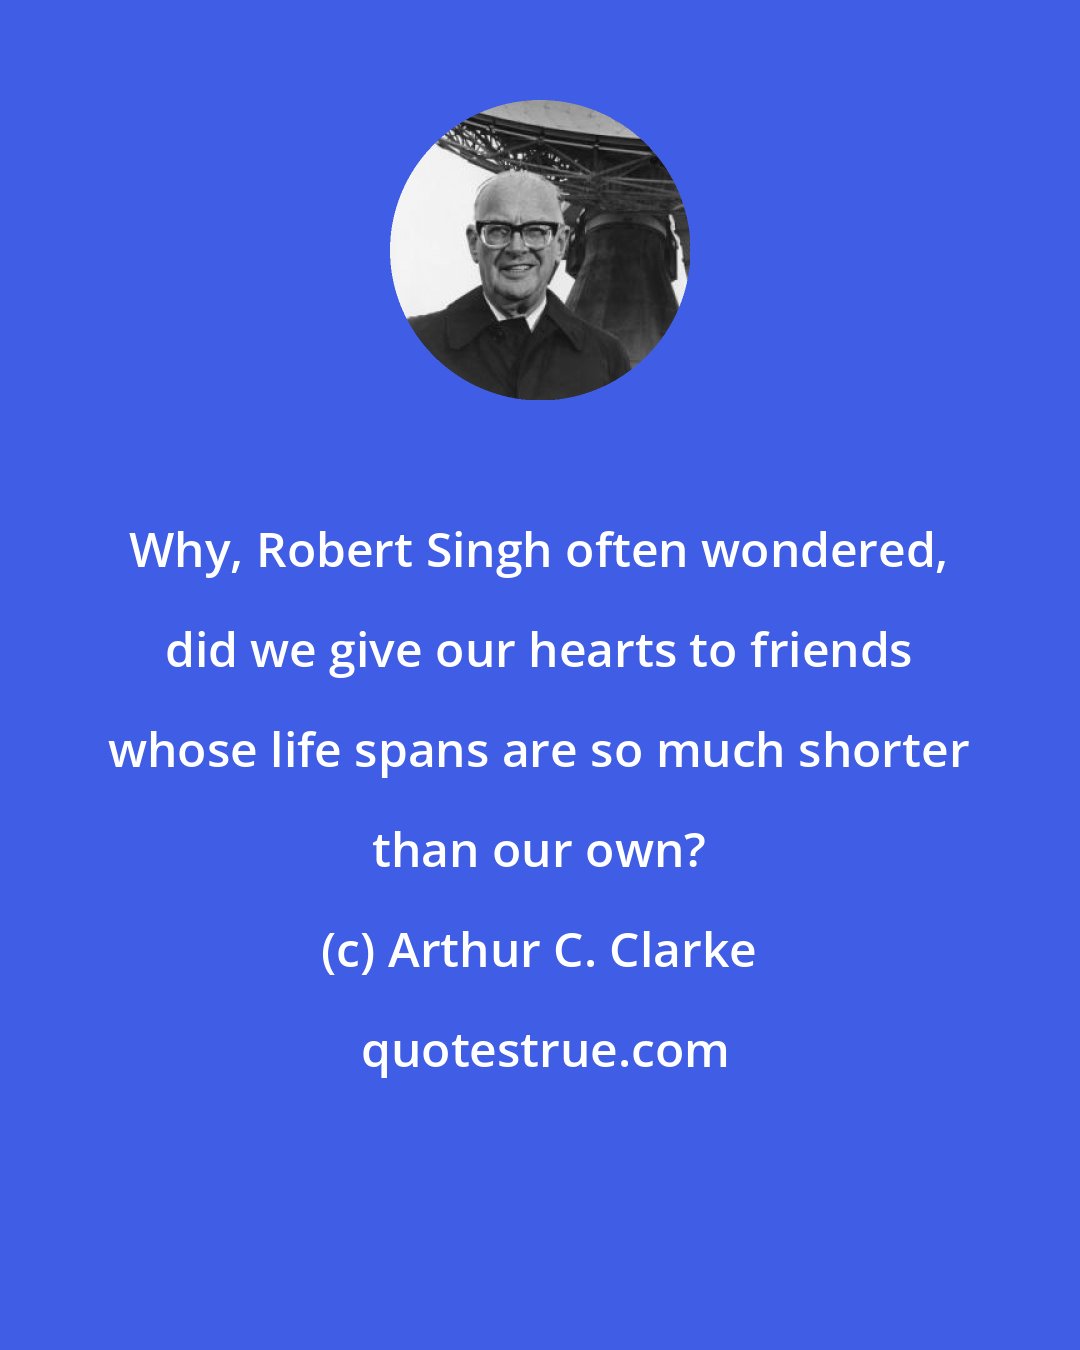 Arthur C. Clarke: Why, Robert Singh often wondered, did we give our hearts to friends whose life spans are so much shorter than our own?